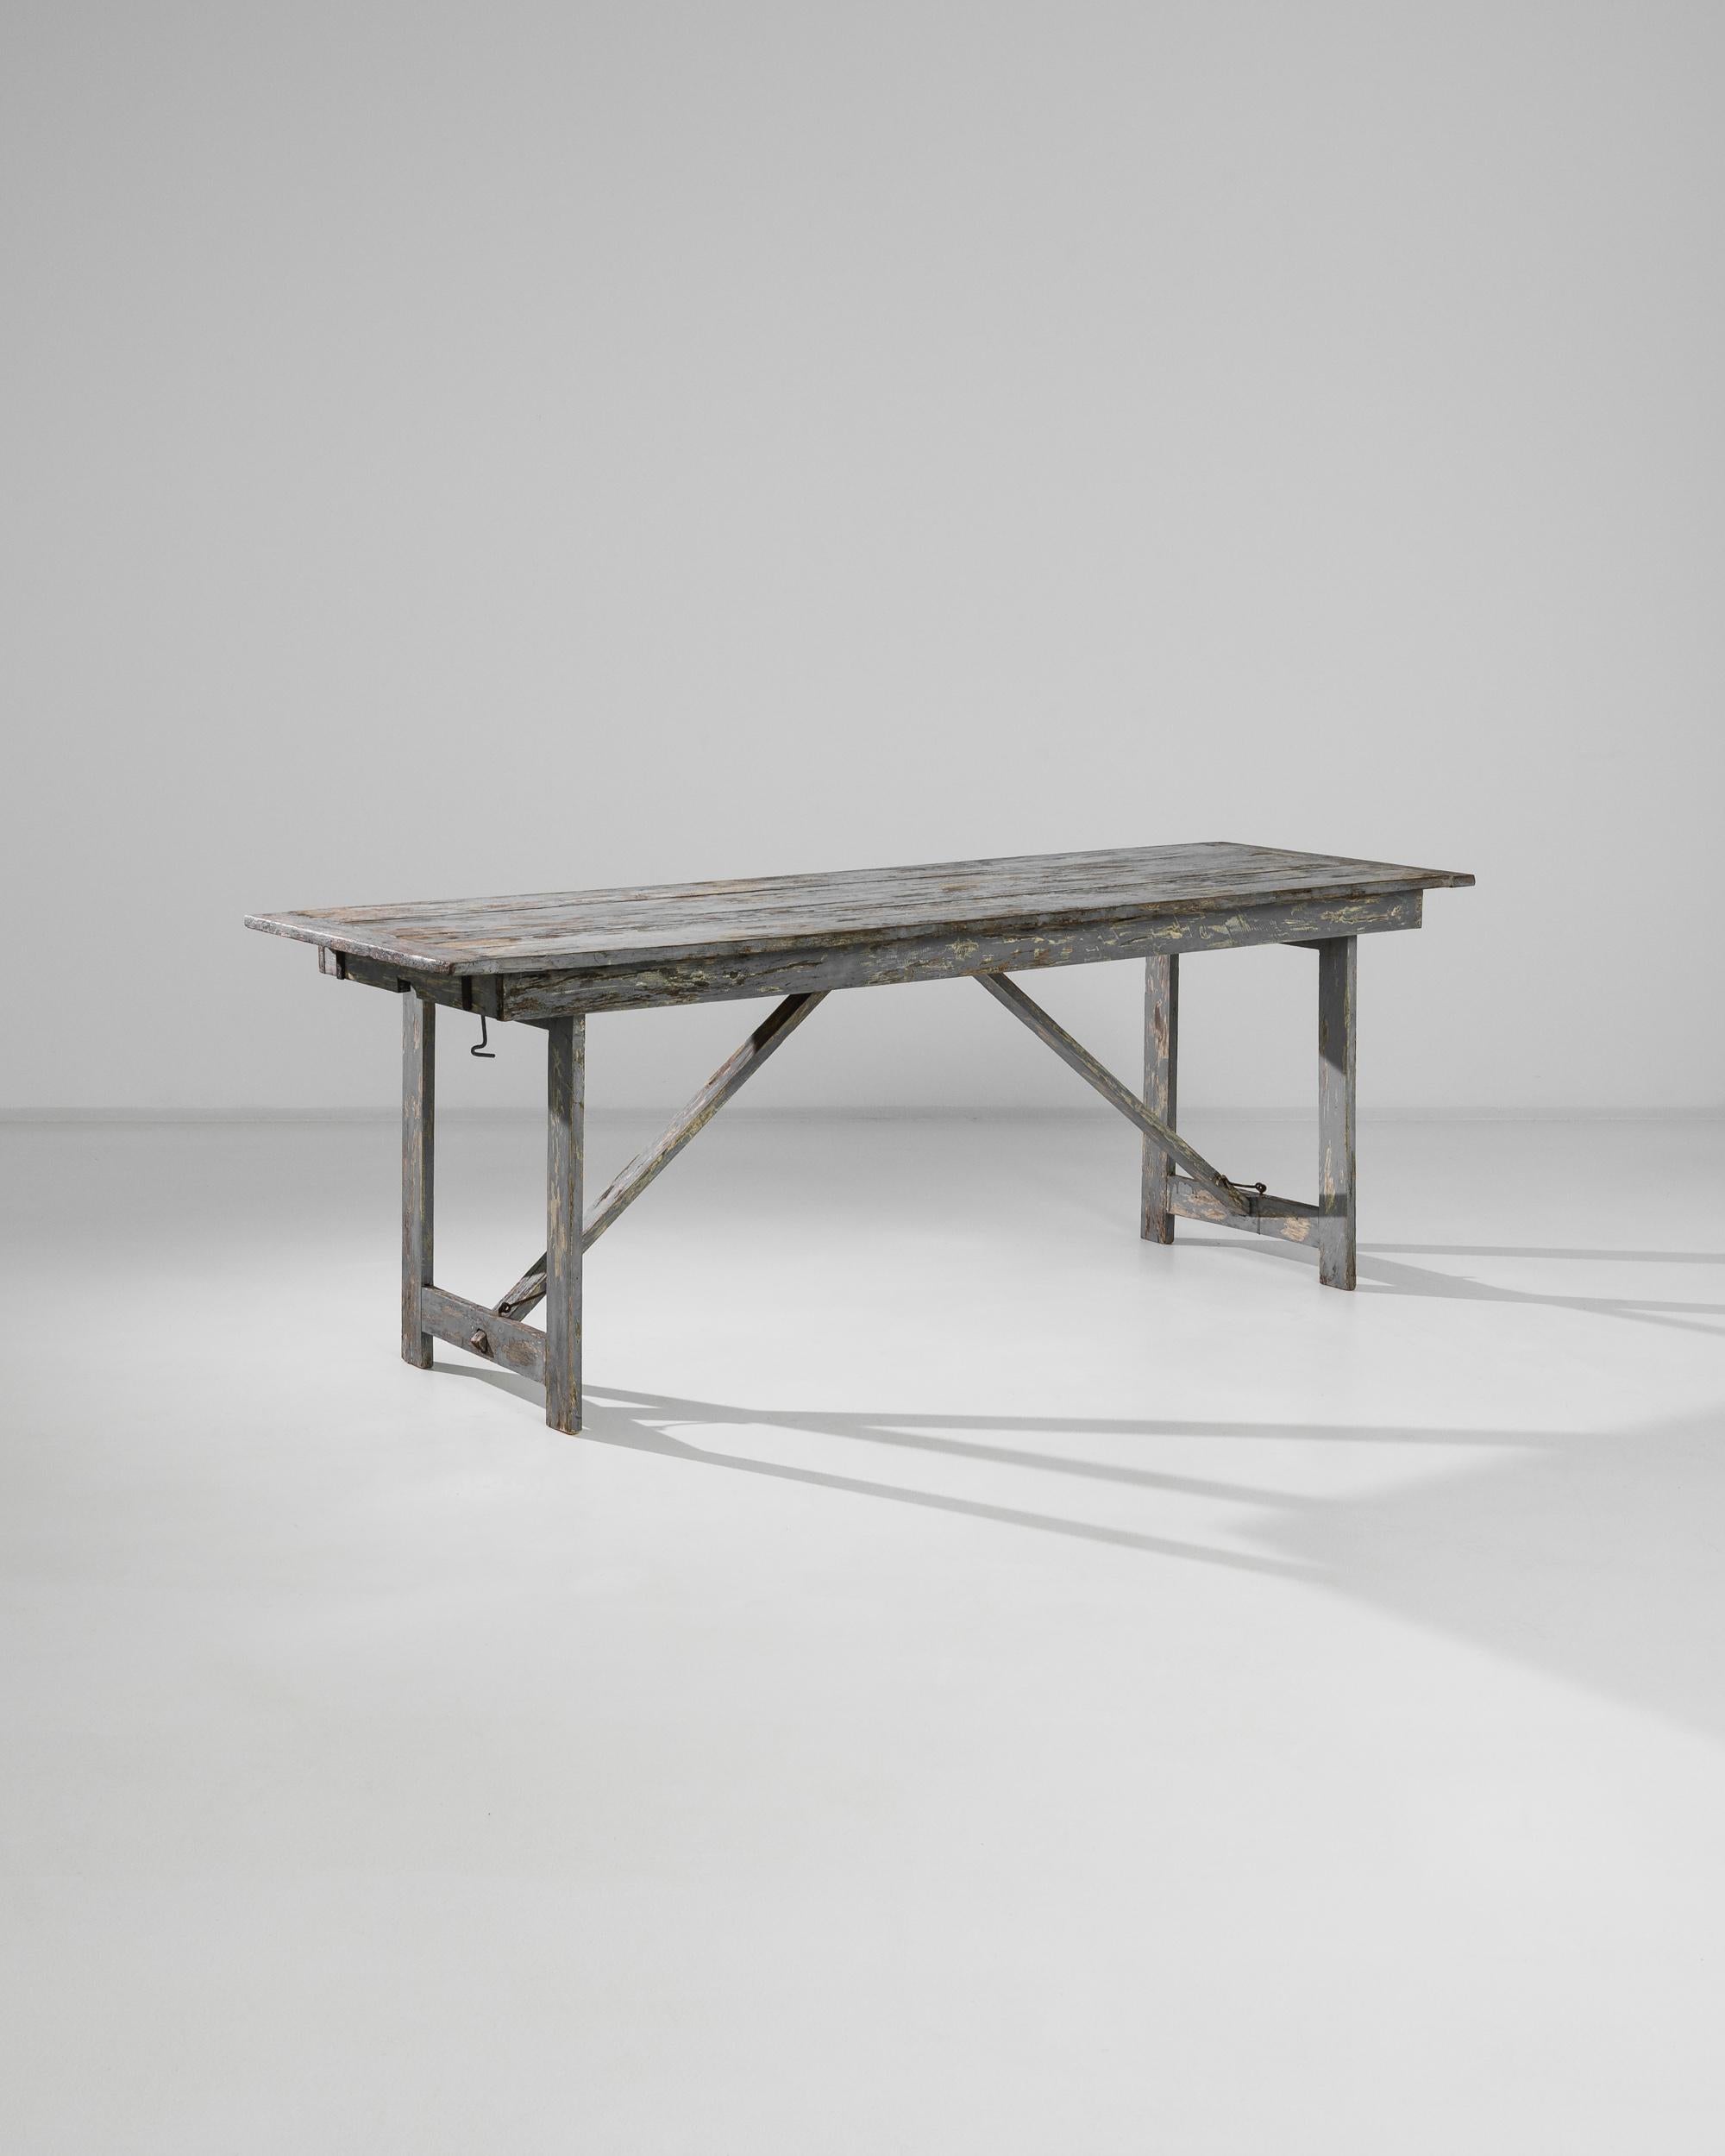 A wooden table from 1950s France with a rustic patina. The original coat of dove-grey paint has weathered over time, revealing notes of primrose yellow and glimpses of the natural wood beneath. Diagonal struts lend a note of complexity to the